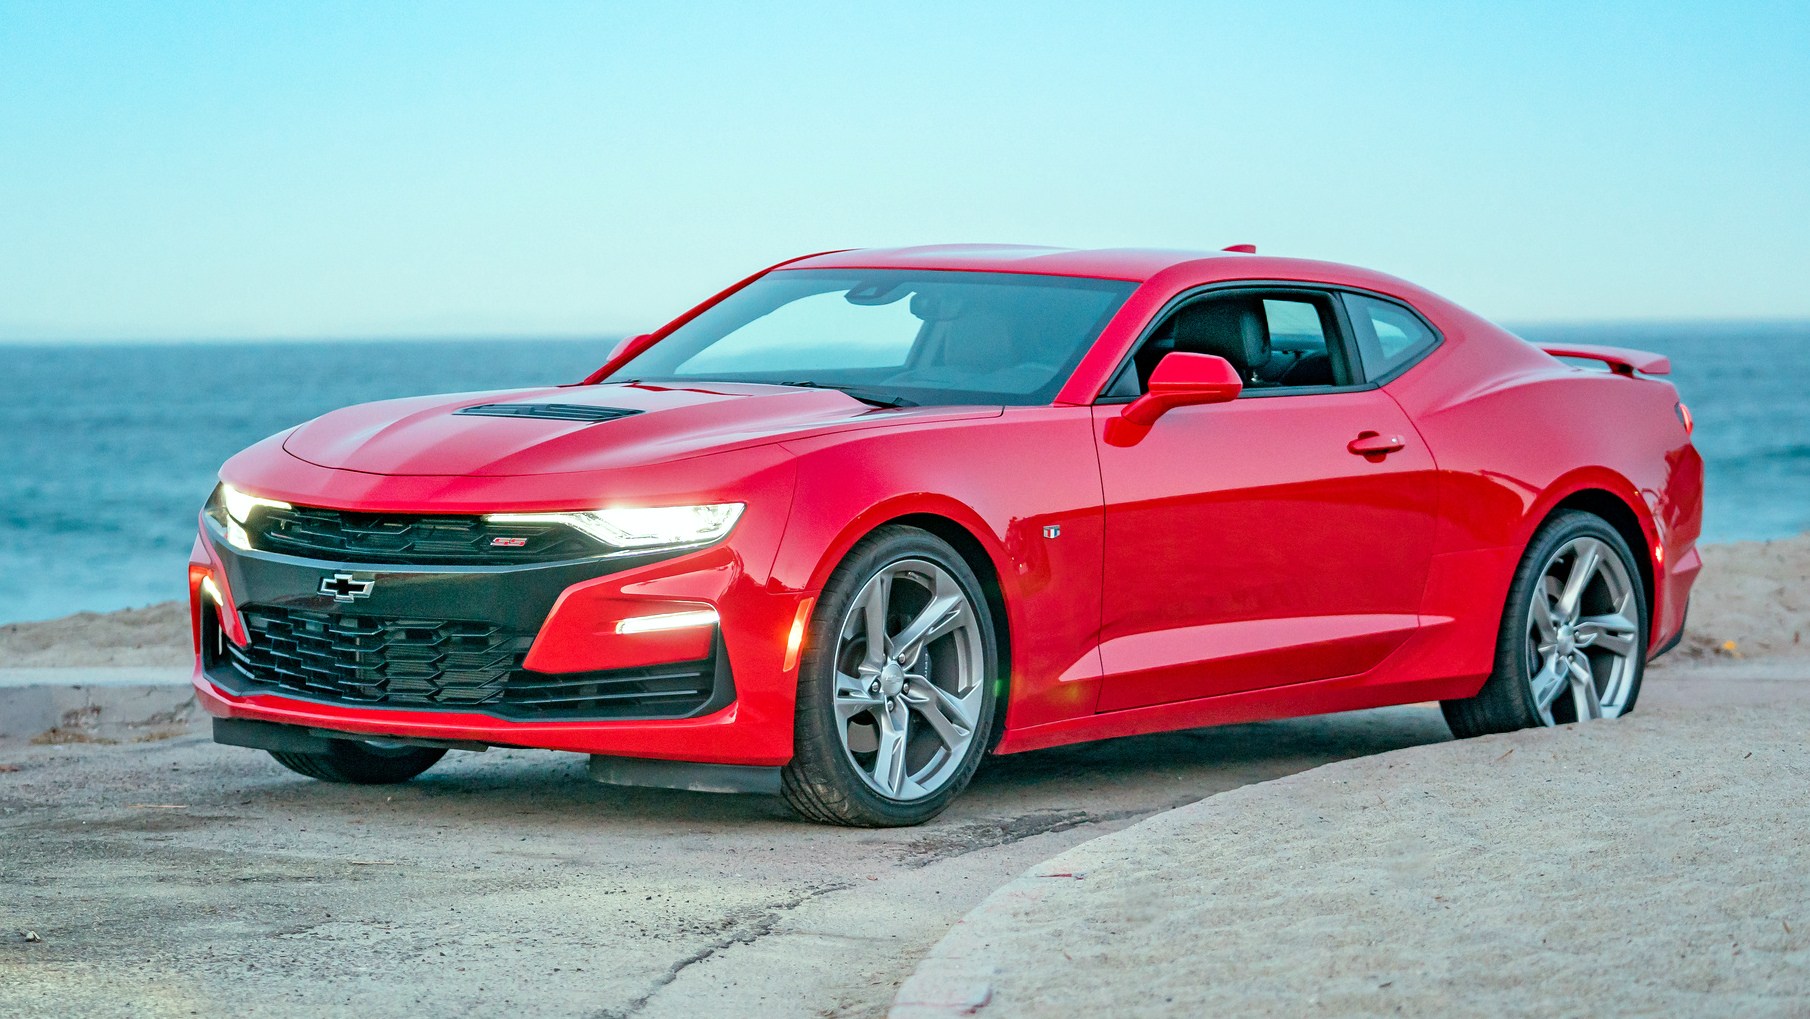 2019 Chevrolet Camaro 1ss 2dr Coupe